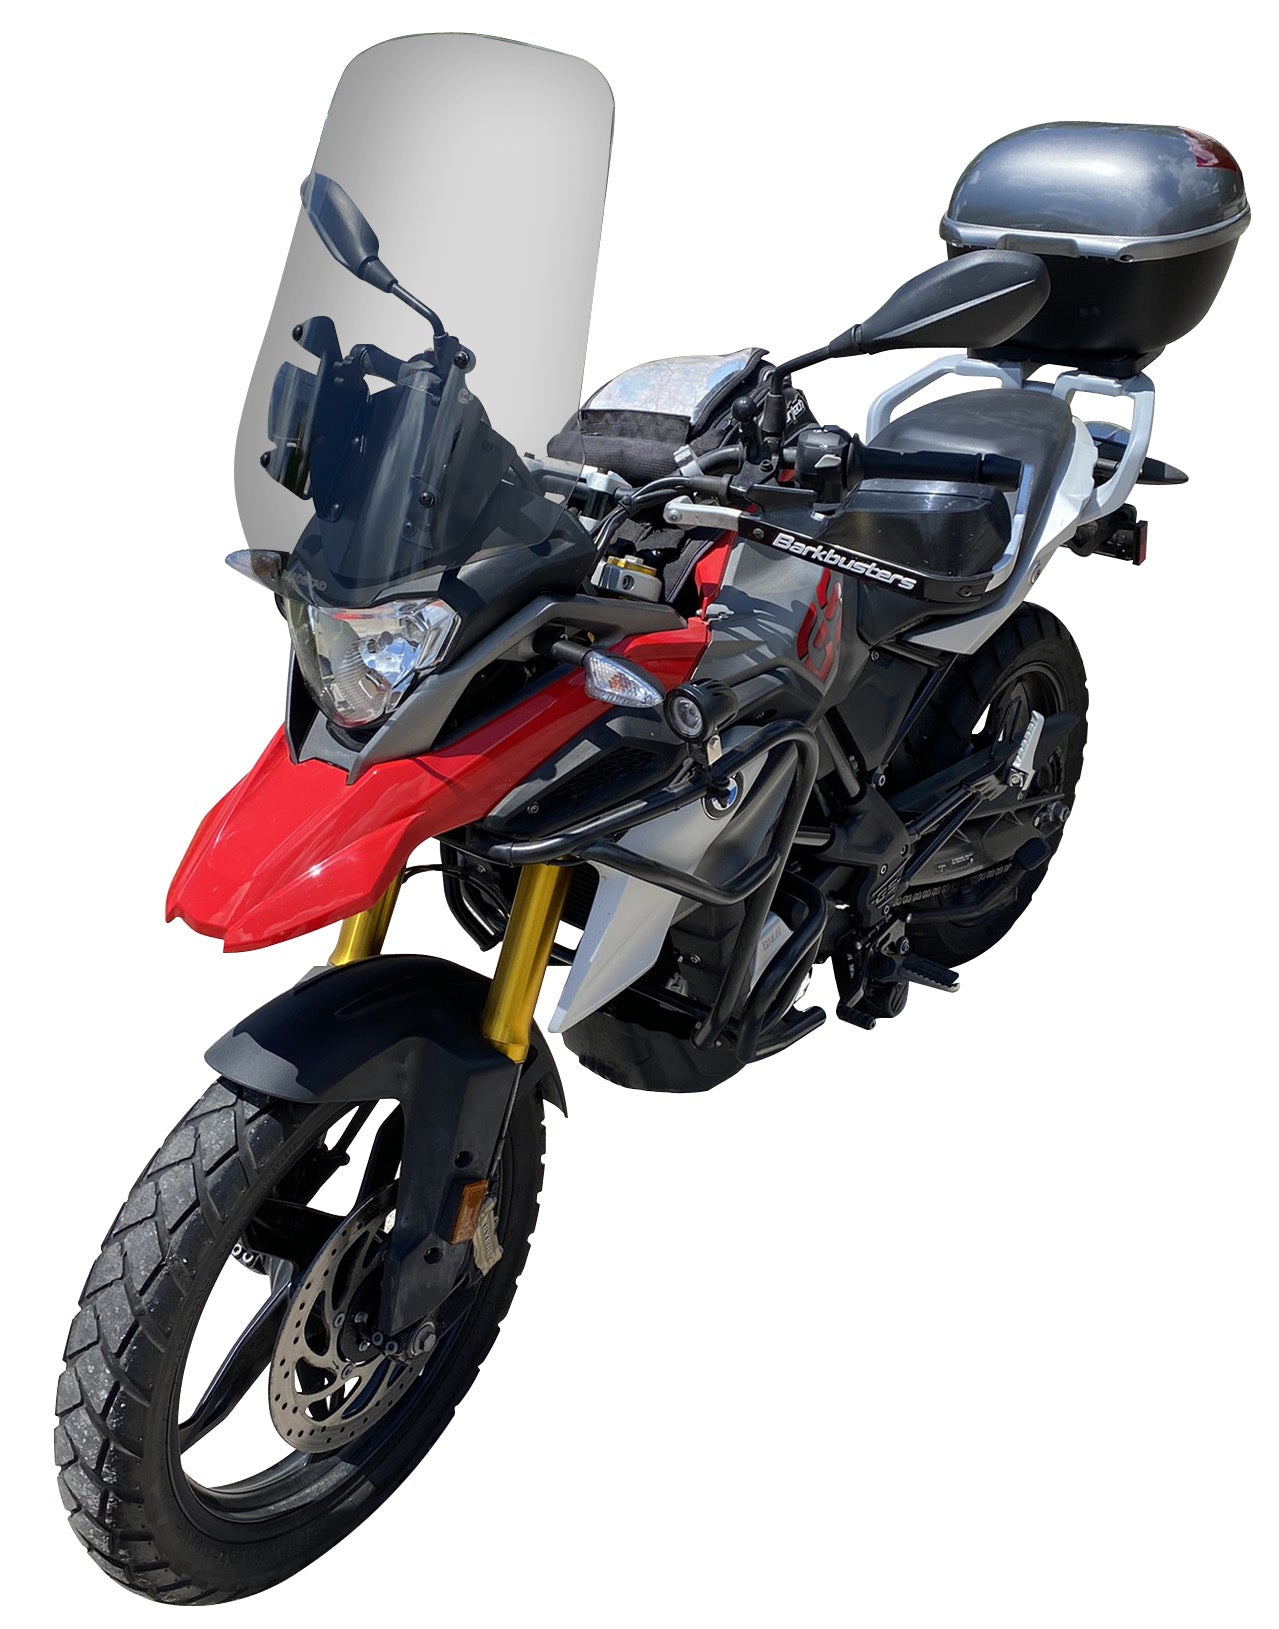 Adjustable Windshield System for BMW G310GS (2017 - Up)